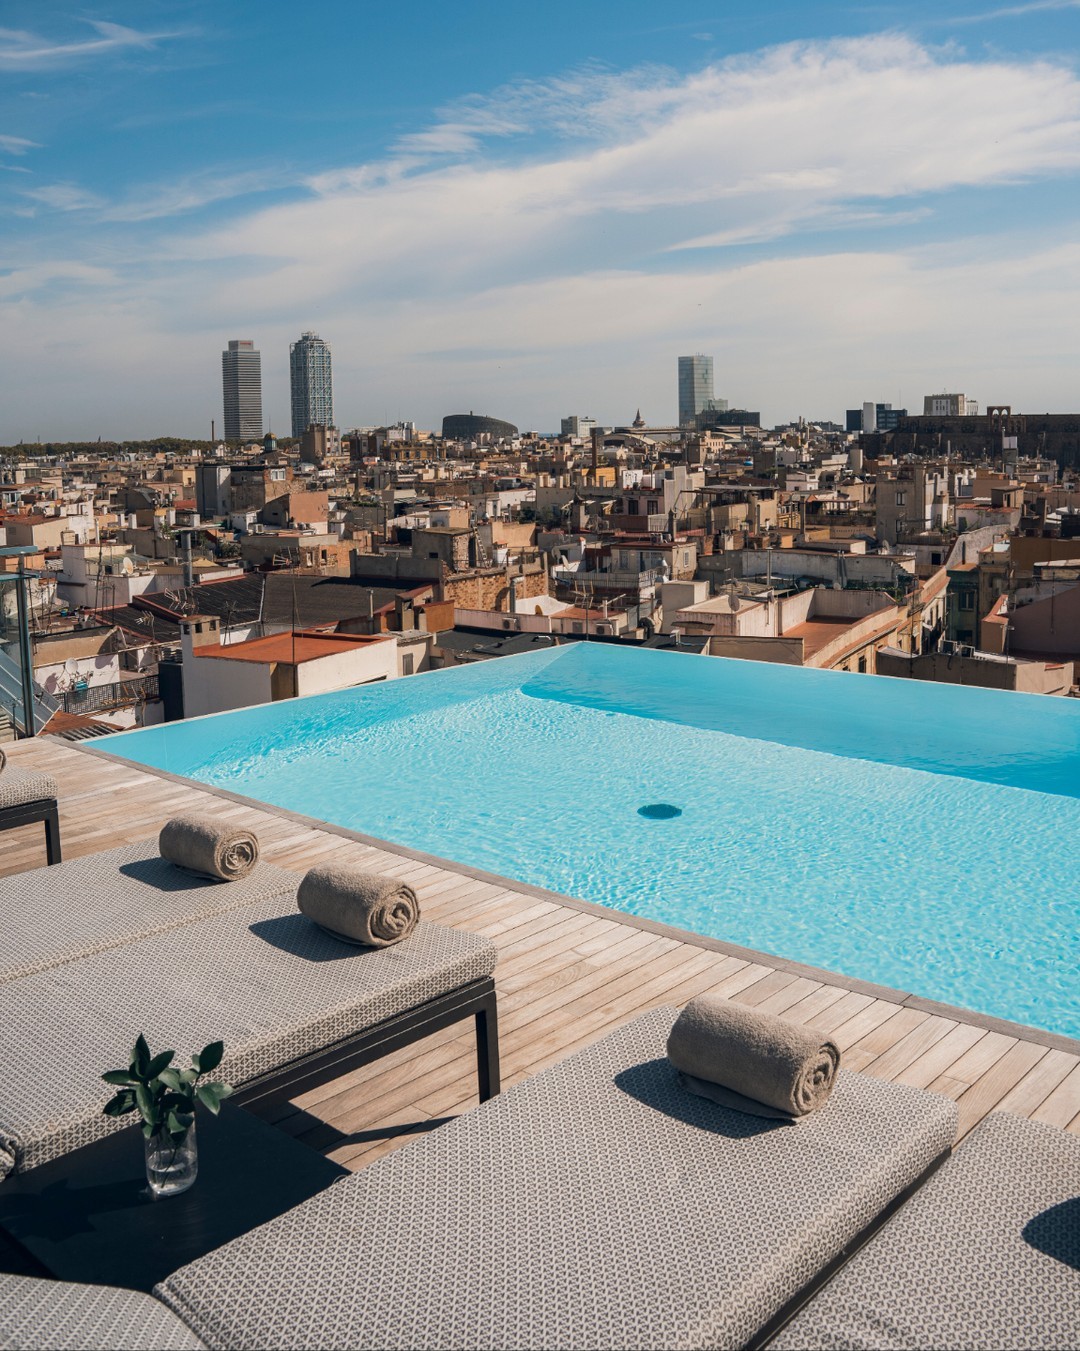 Discover the city from the amazing terrace of Grand Hotel Central Barcelona - Best Infinity Pools in Europe